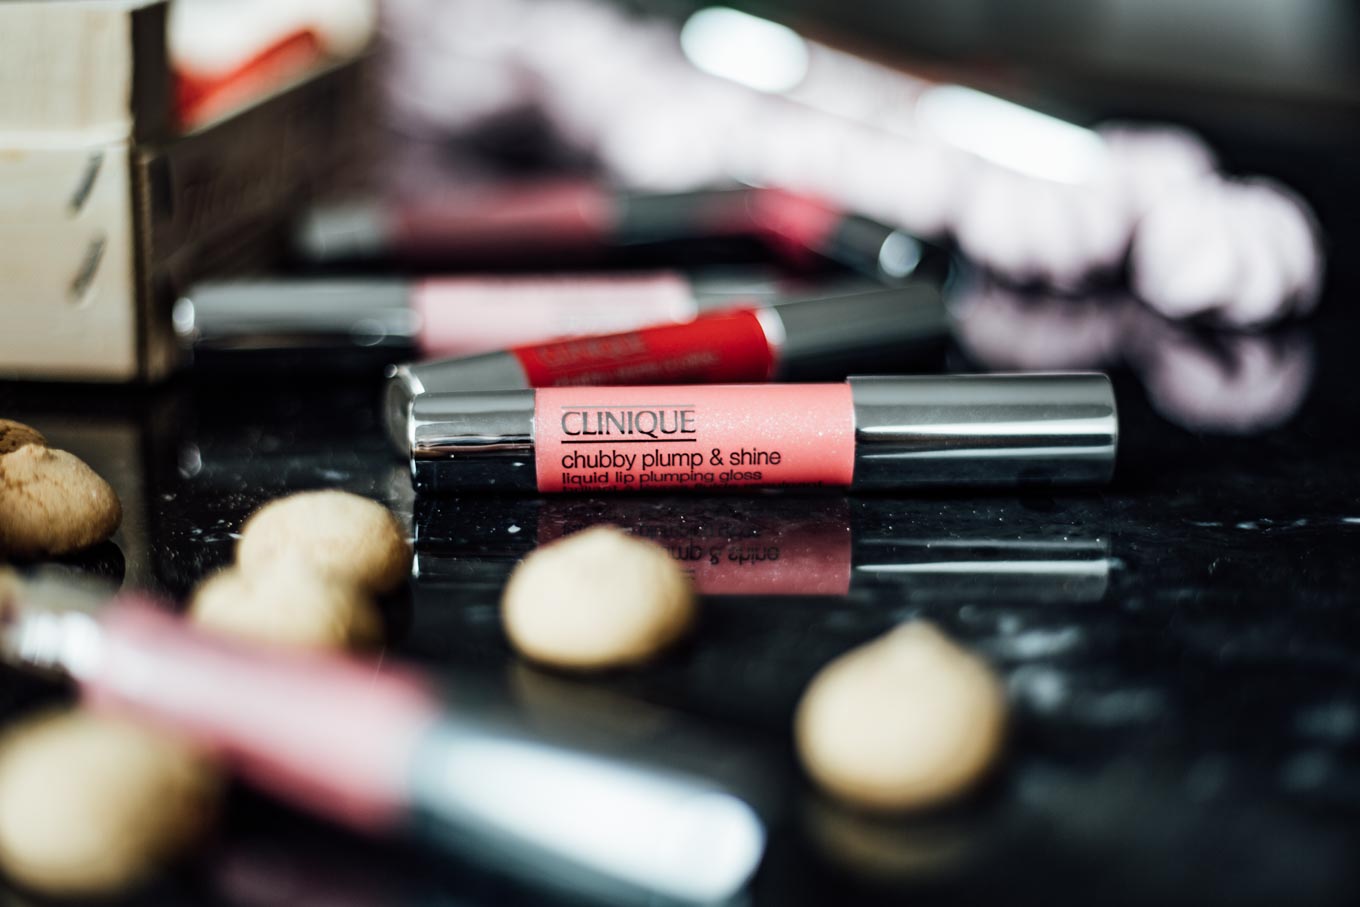 Treat your Mom for Mother's Day: Clinique Chubby Stick Plump & Shine | #lovedailydose